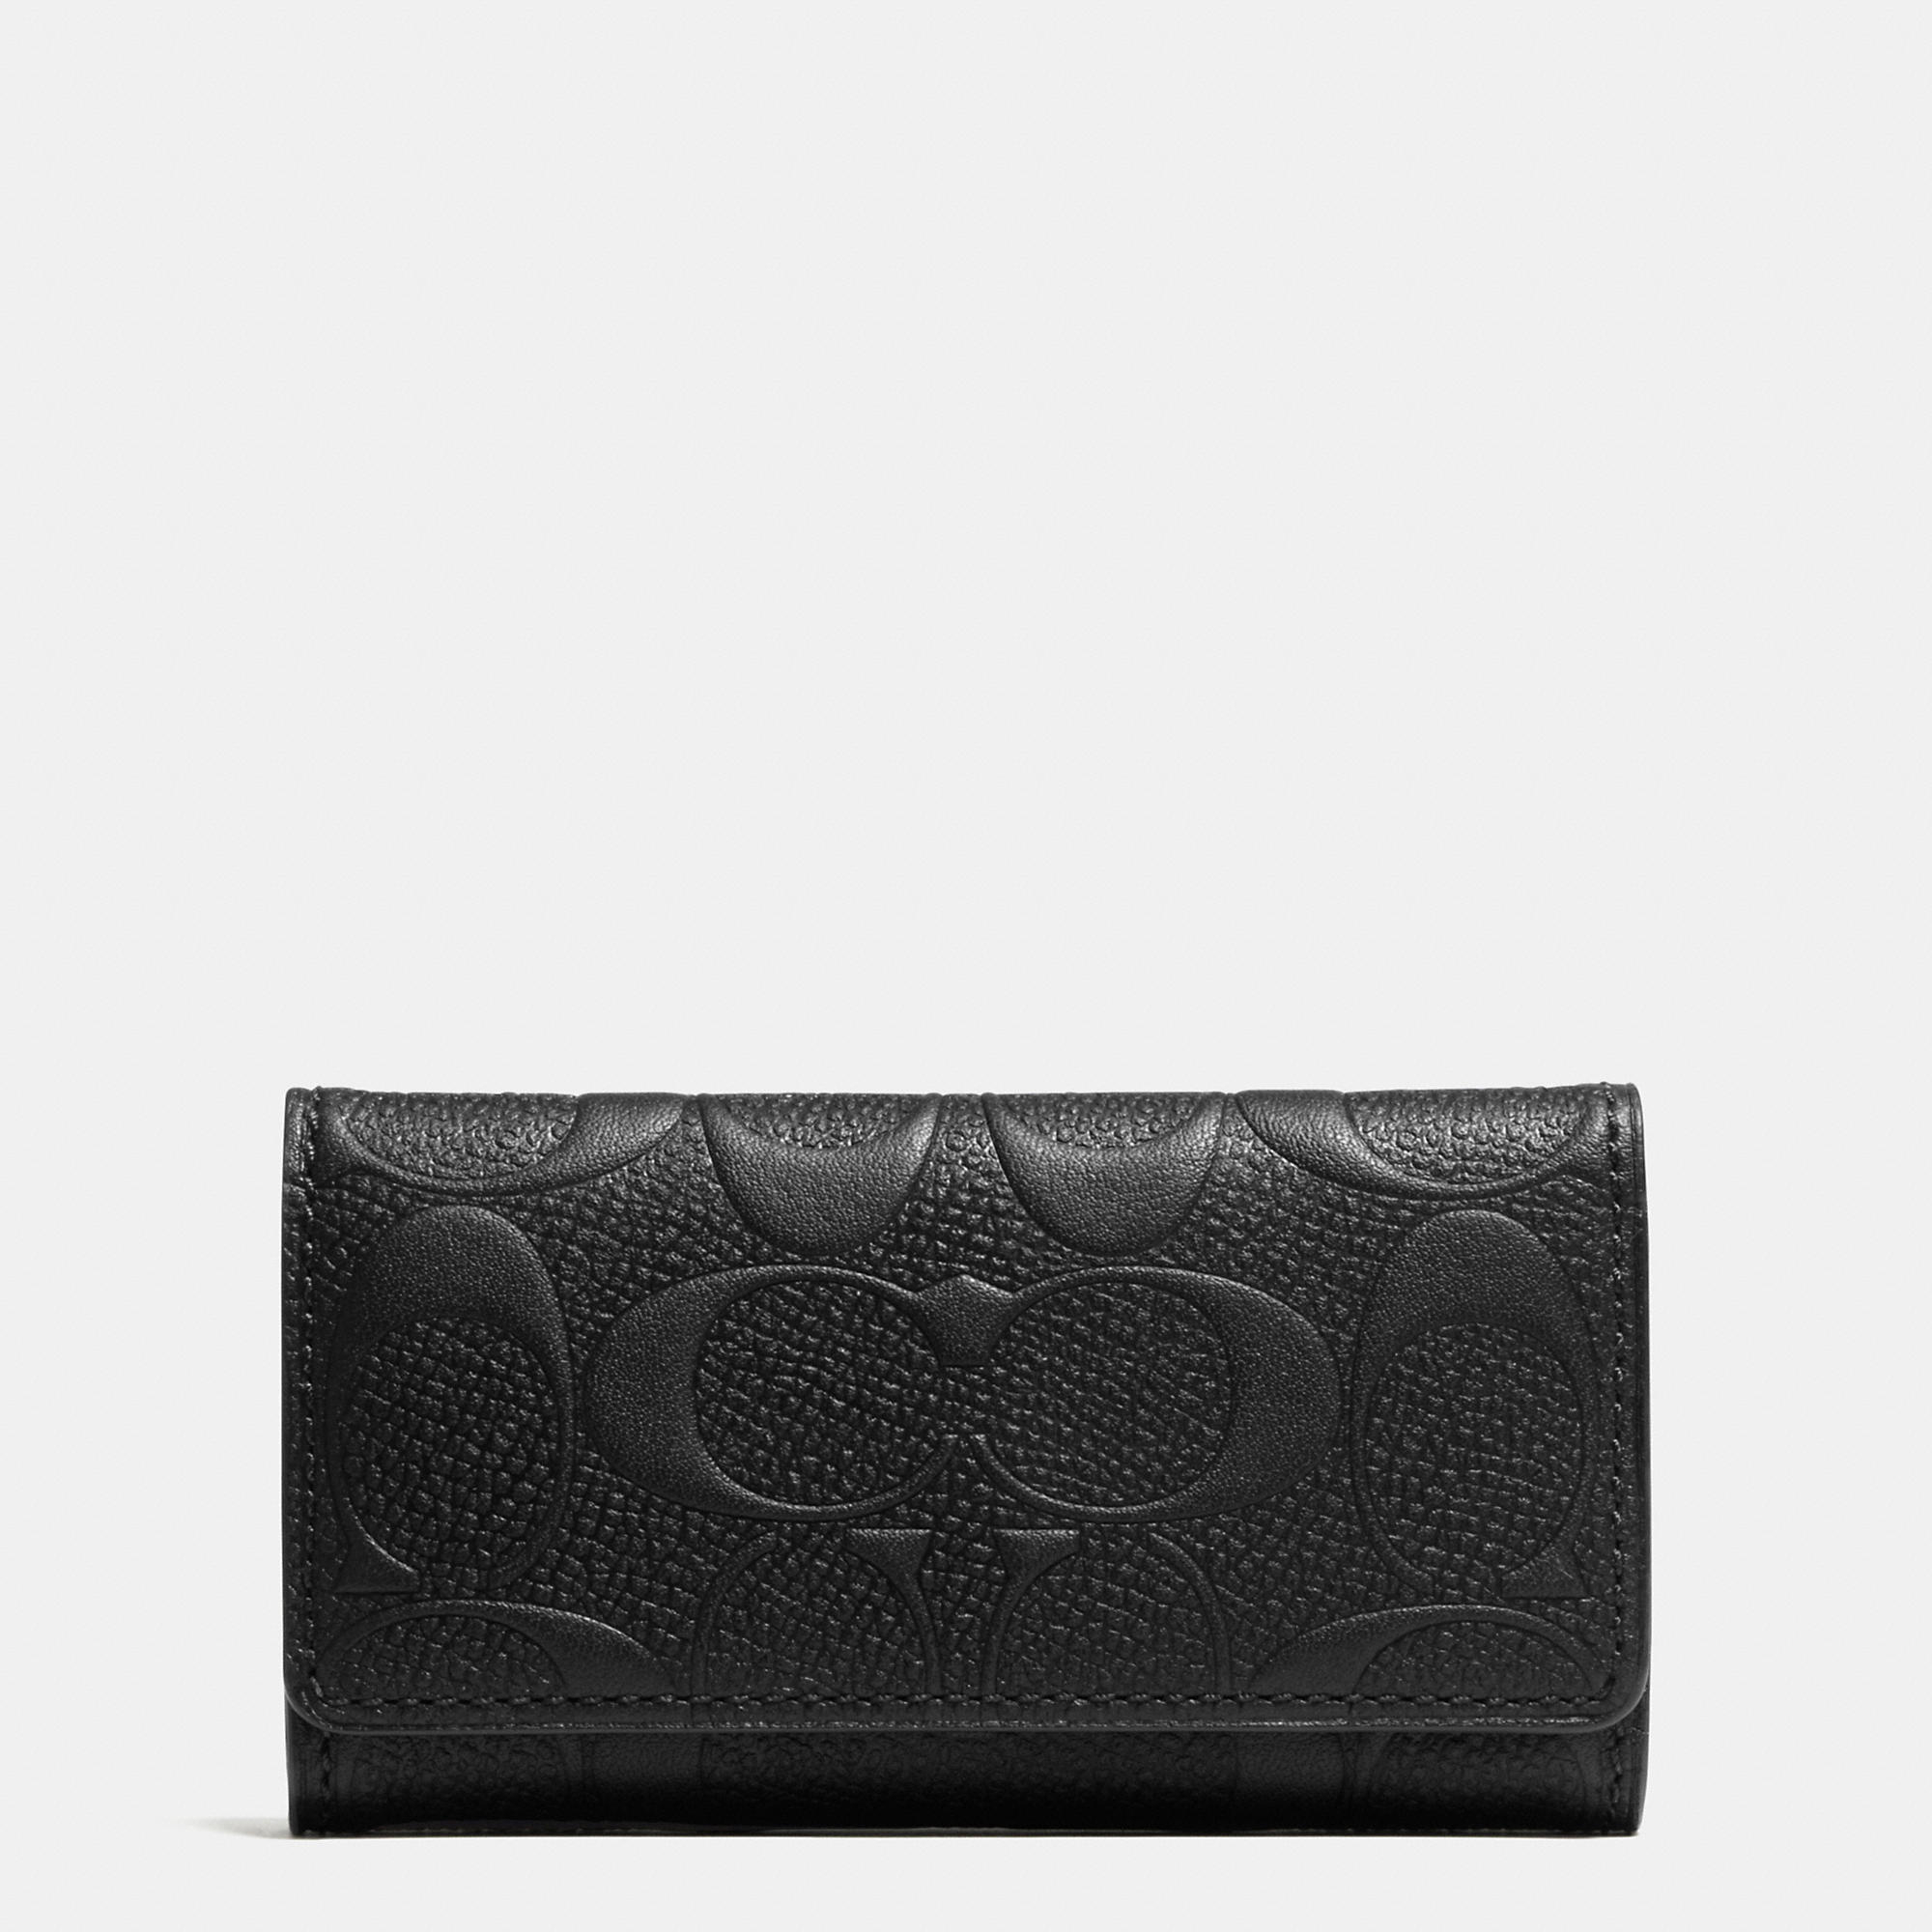 Lyst - Coach 4 Ring Key Case In Signature Crossgrain Leather in Black